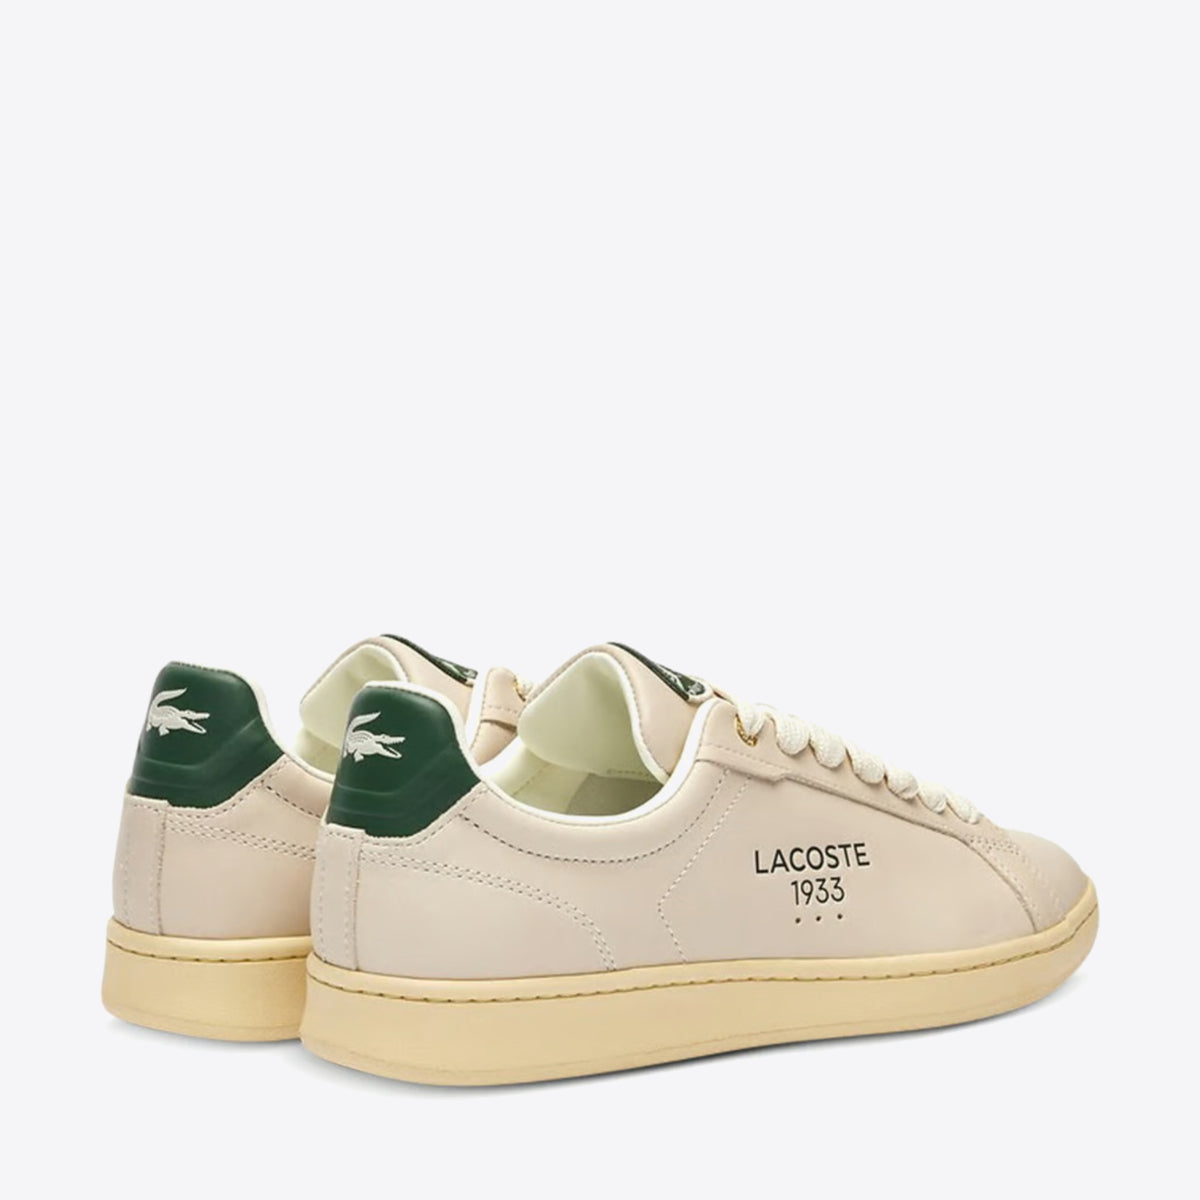 LACOSTE Carnaby Pro 2235 Off White/Green - Image 3